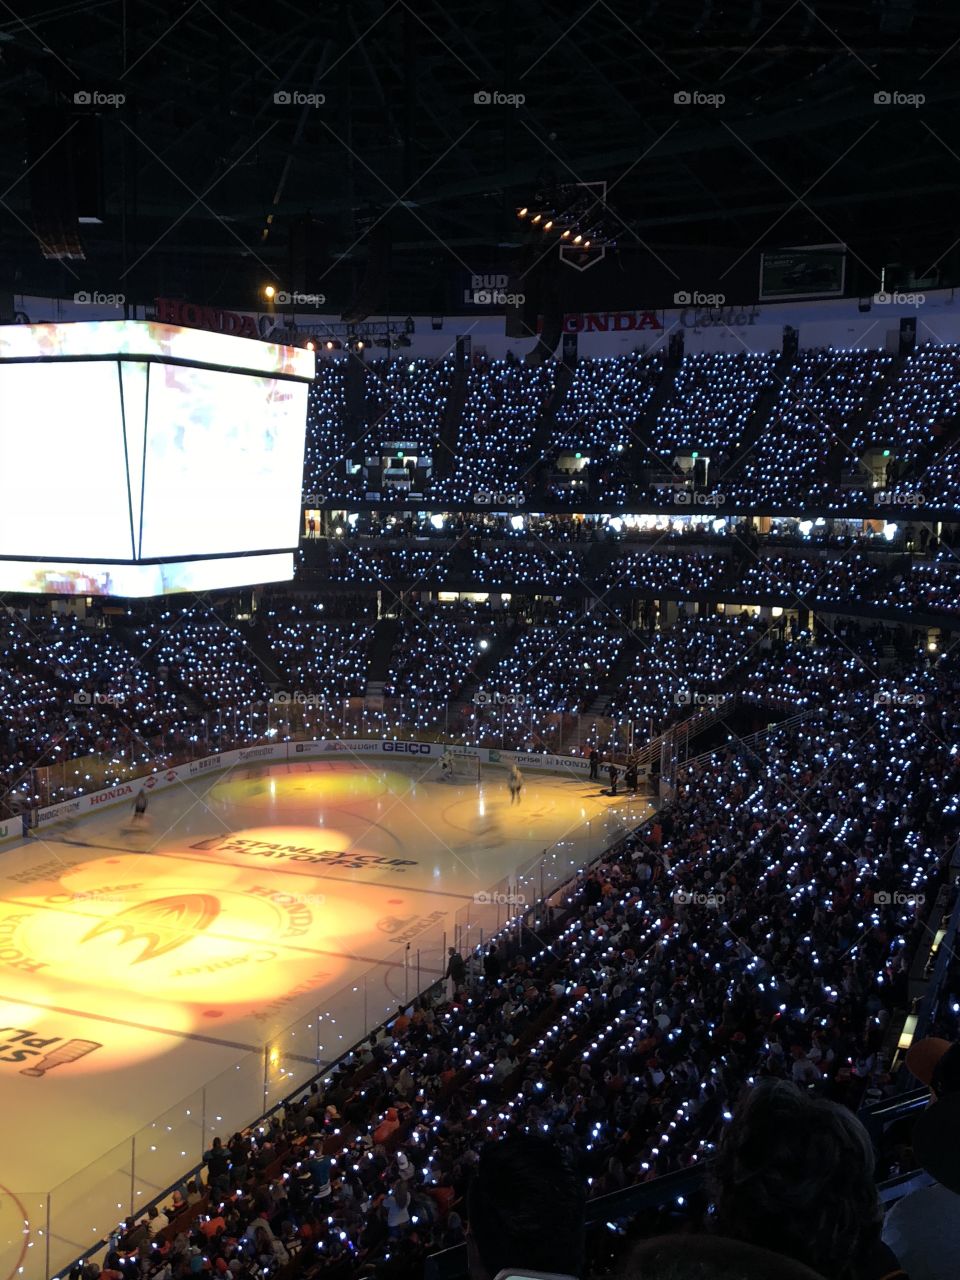 Win or go home. Game one of the ducks vs sharks playoffs series. Lights, music and chants. 